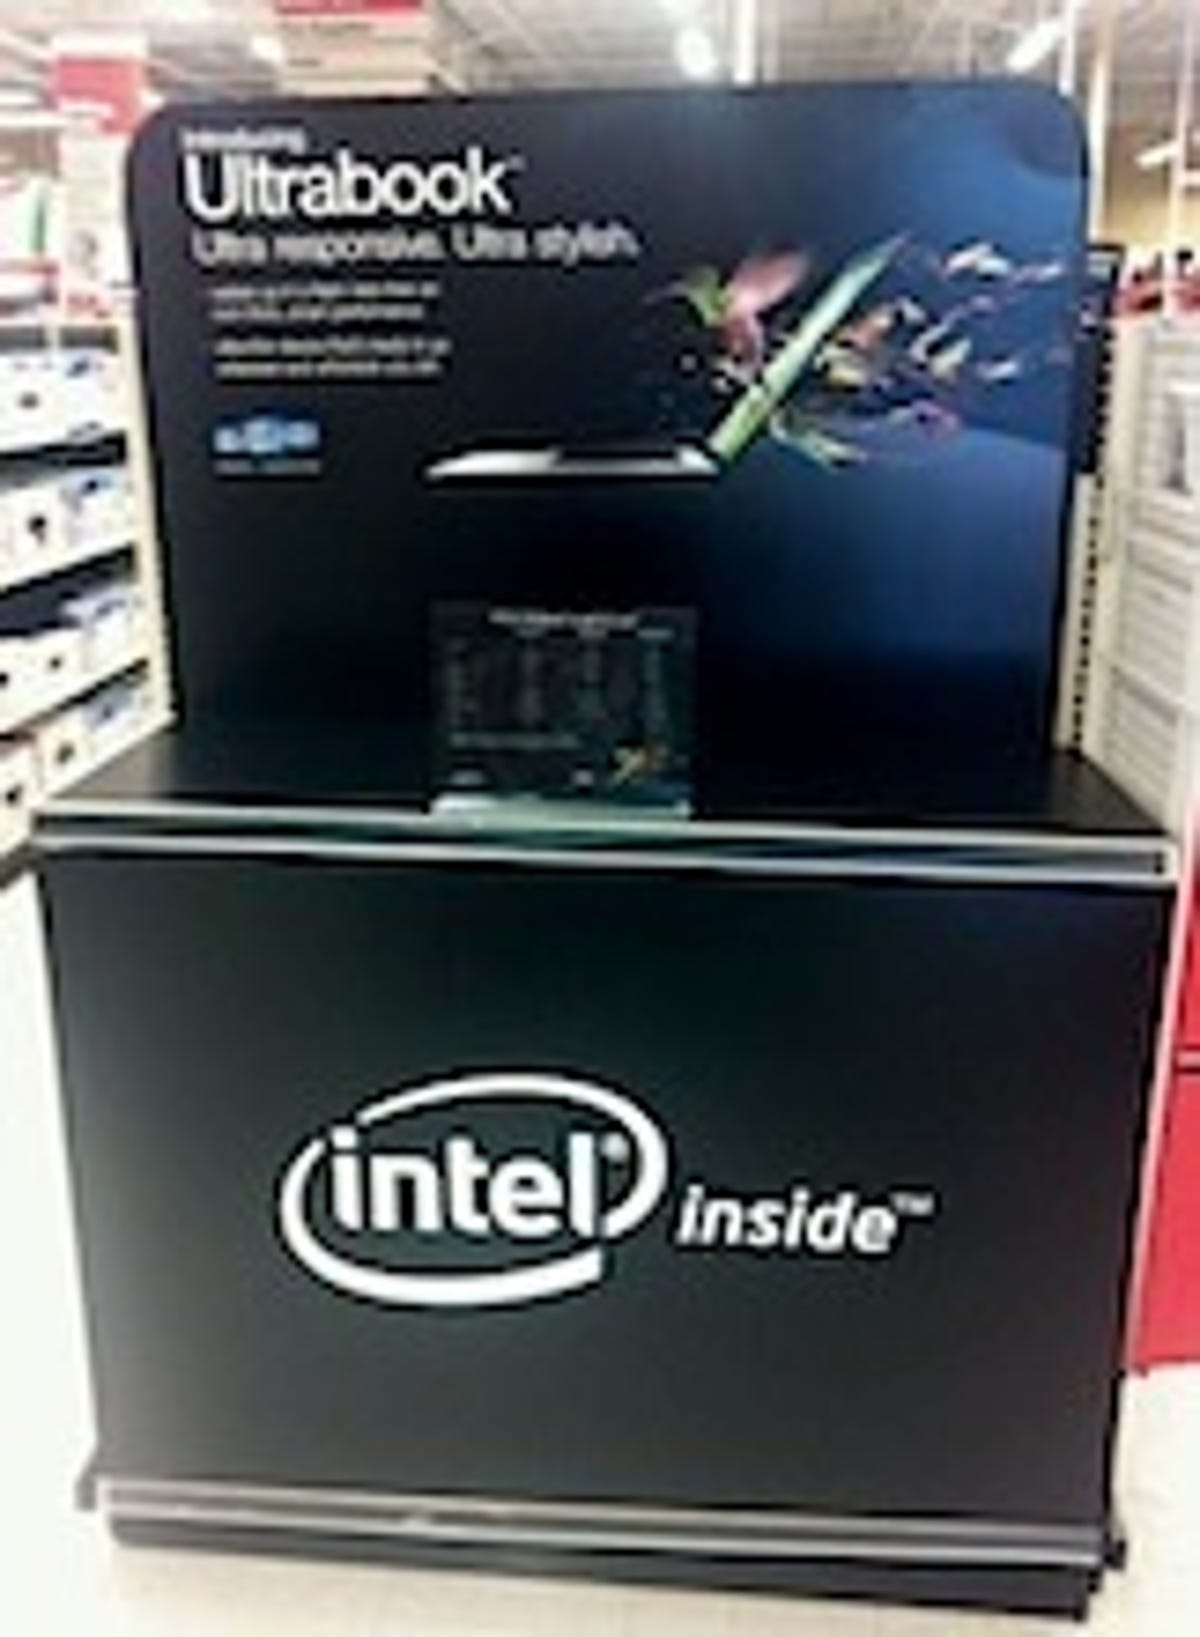 An Intel display promoting ultrabooks at Office Depot.